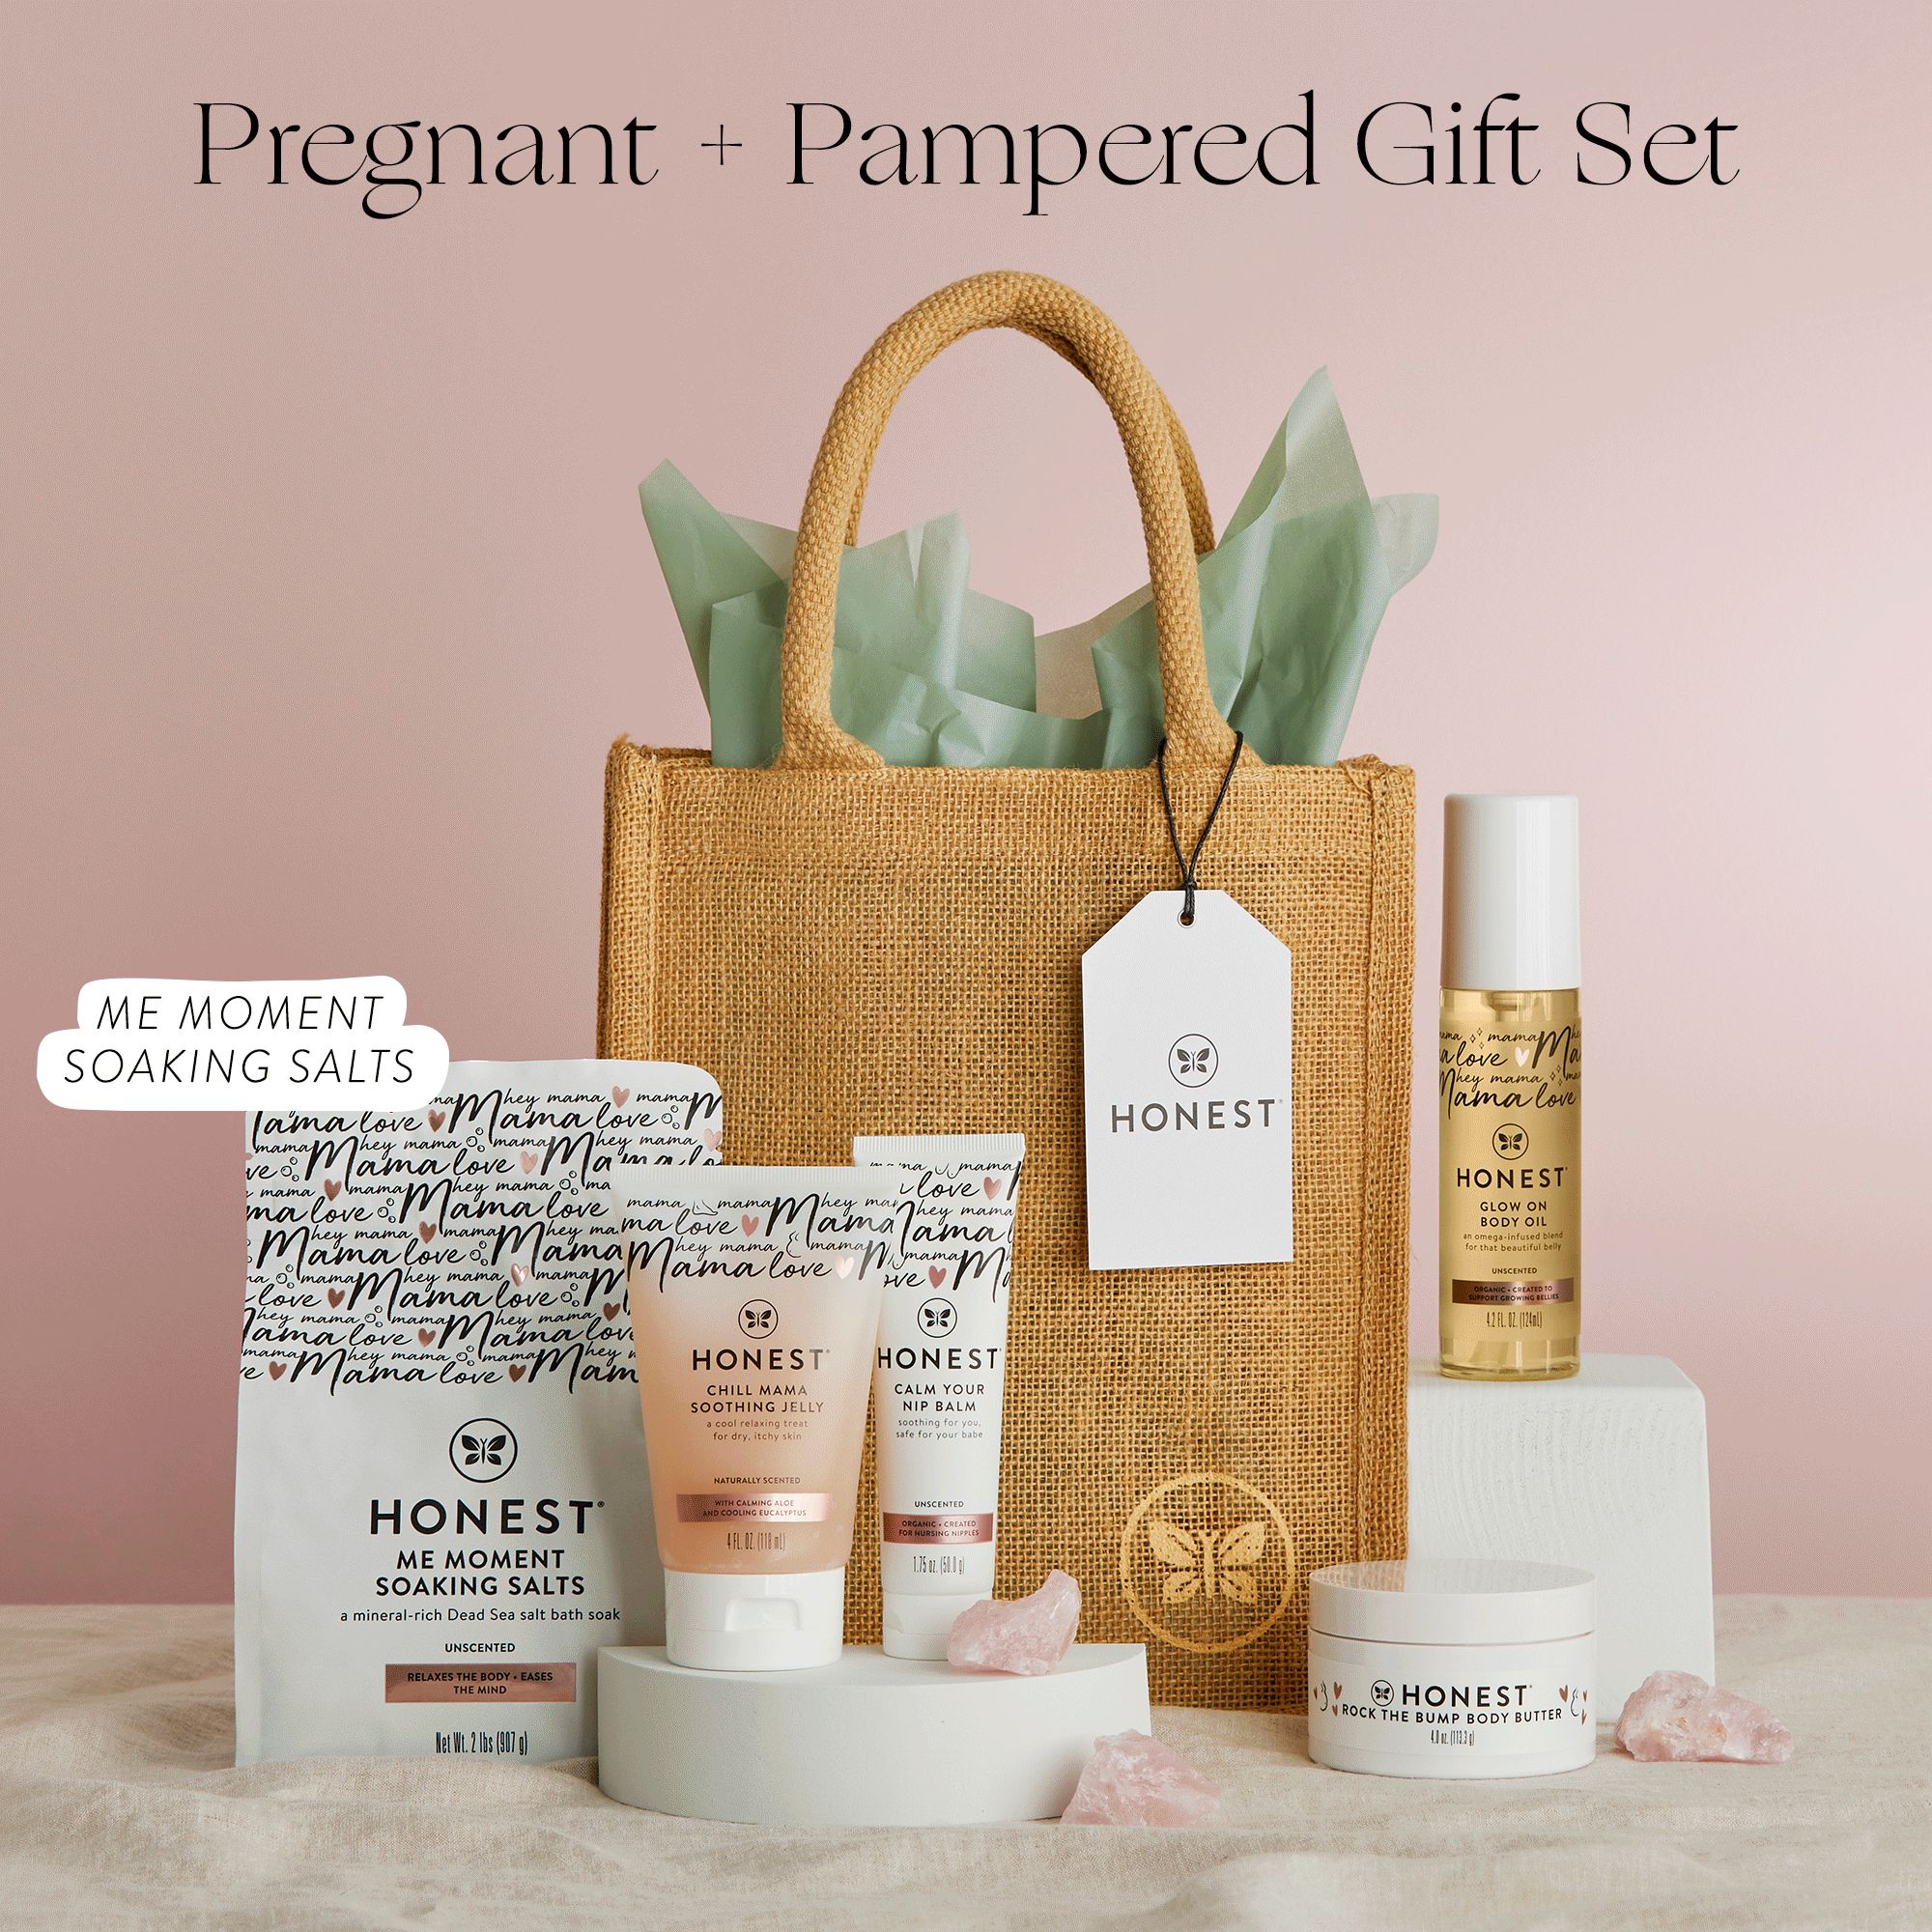 Pregnant + Pampered Gift Set | The Honest Company